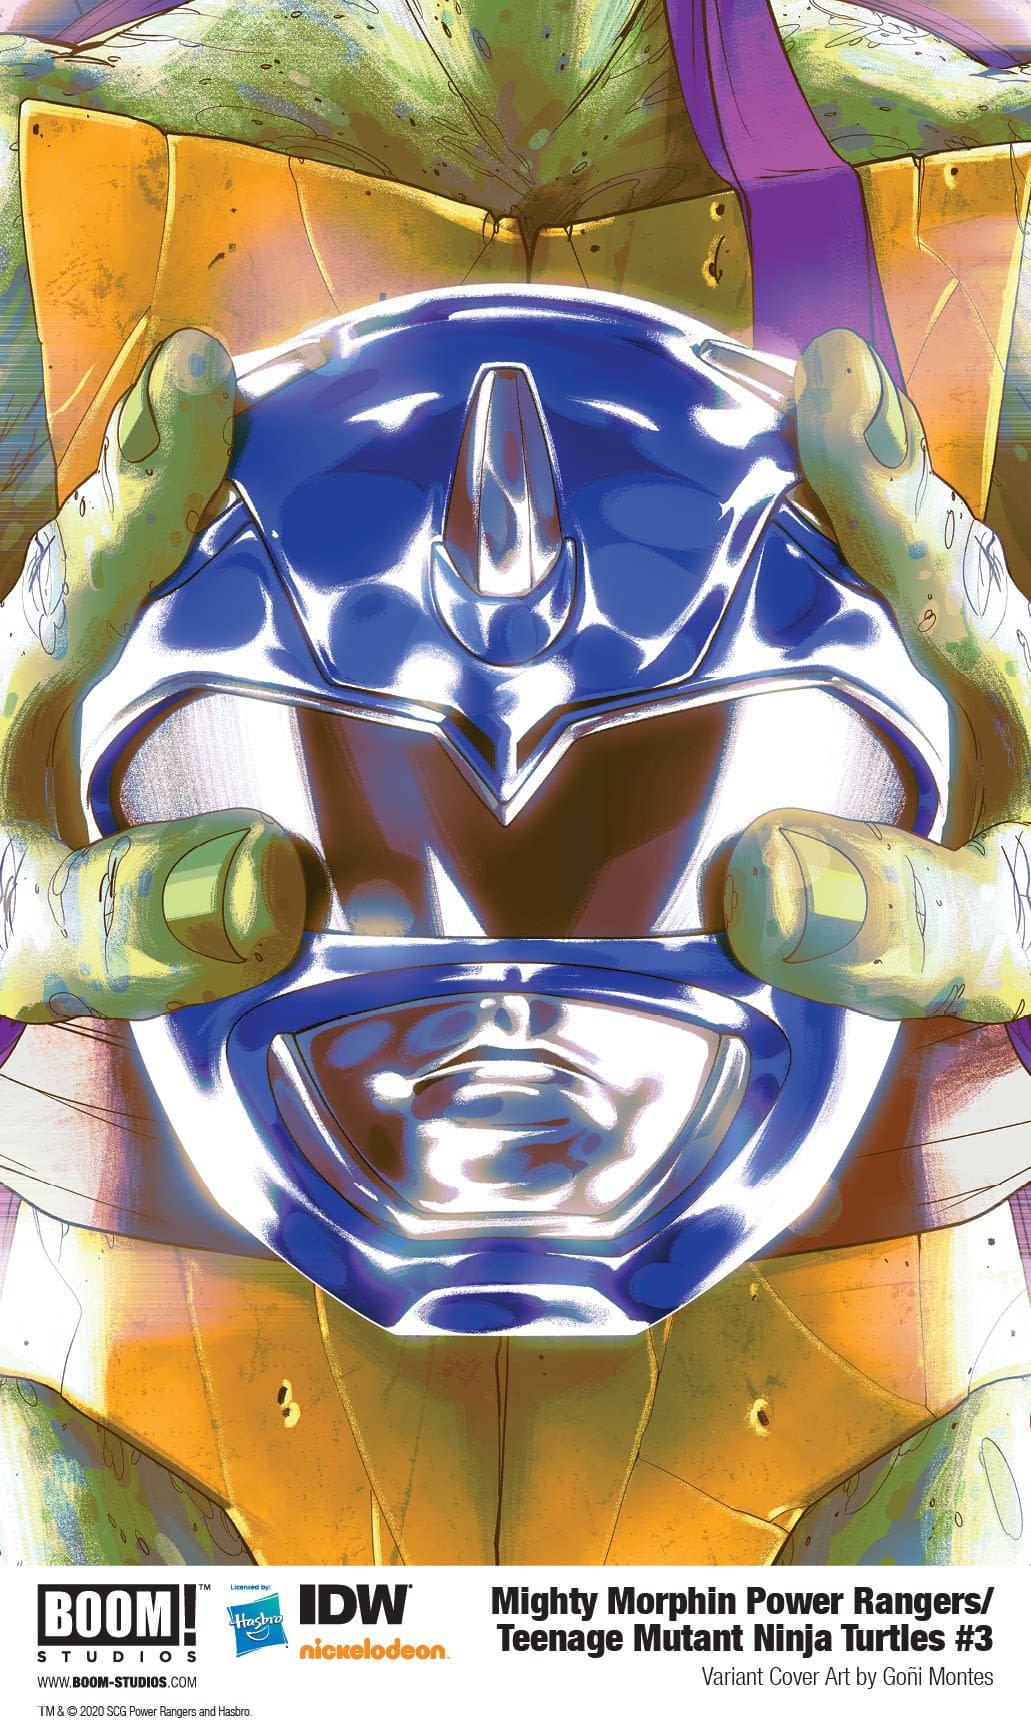 BOOM! Reveals Hot Speculator Tip About Power Rangers/TMNT #3